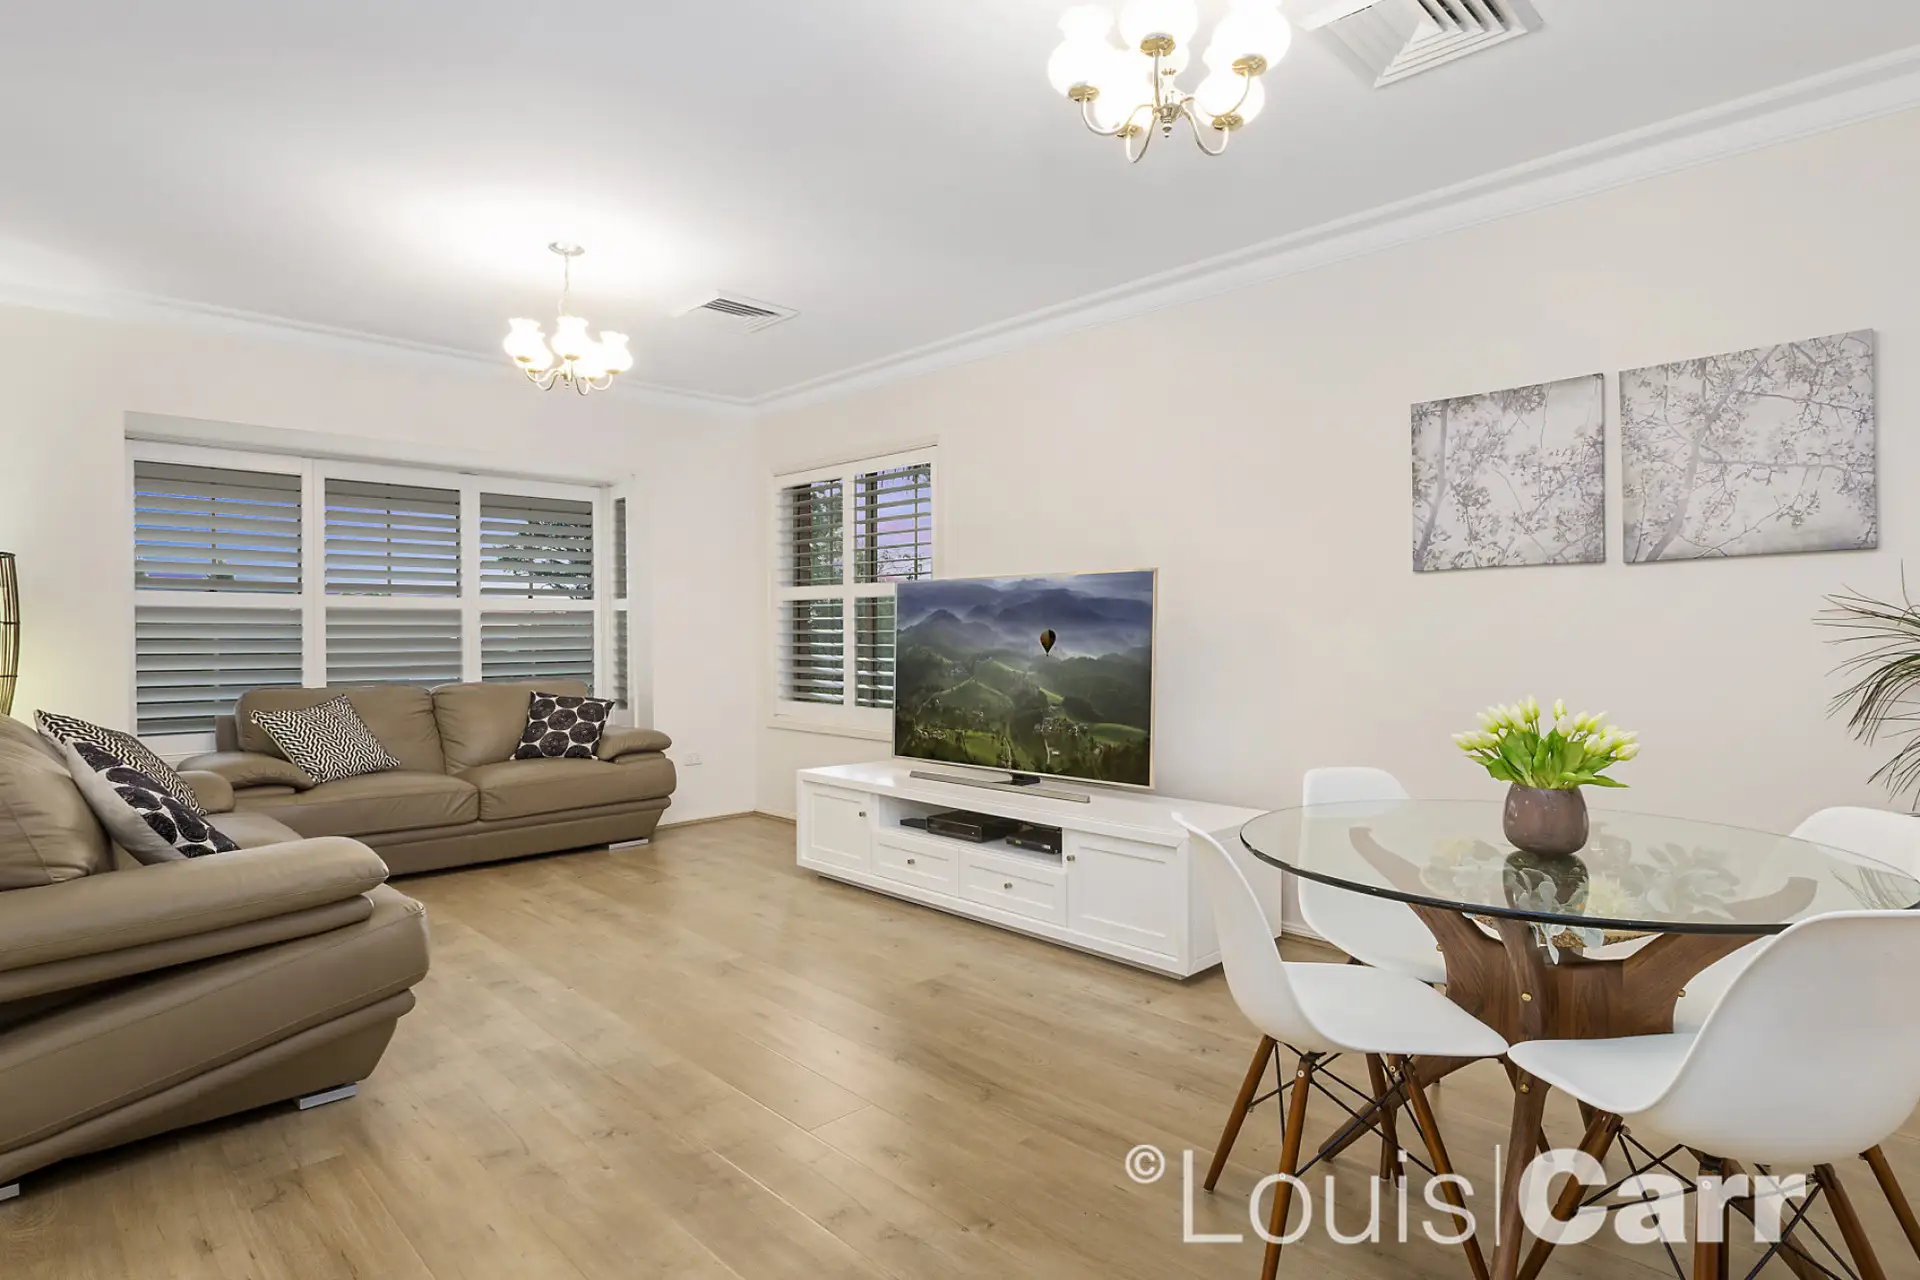 Photo #5: 9 Fullers Road, Glenhaven - Sold by Louis Carr Real Estate